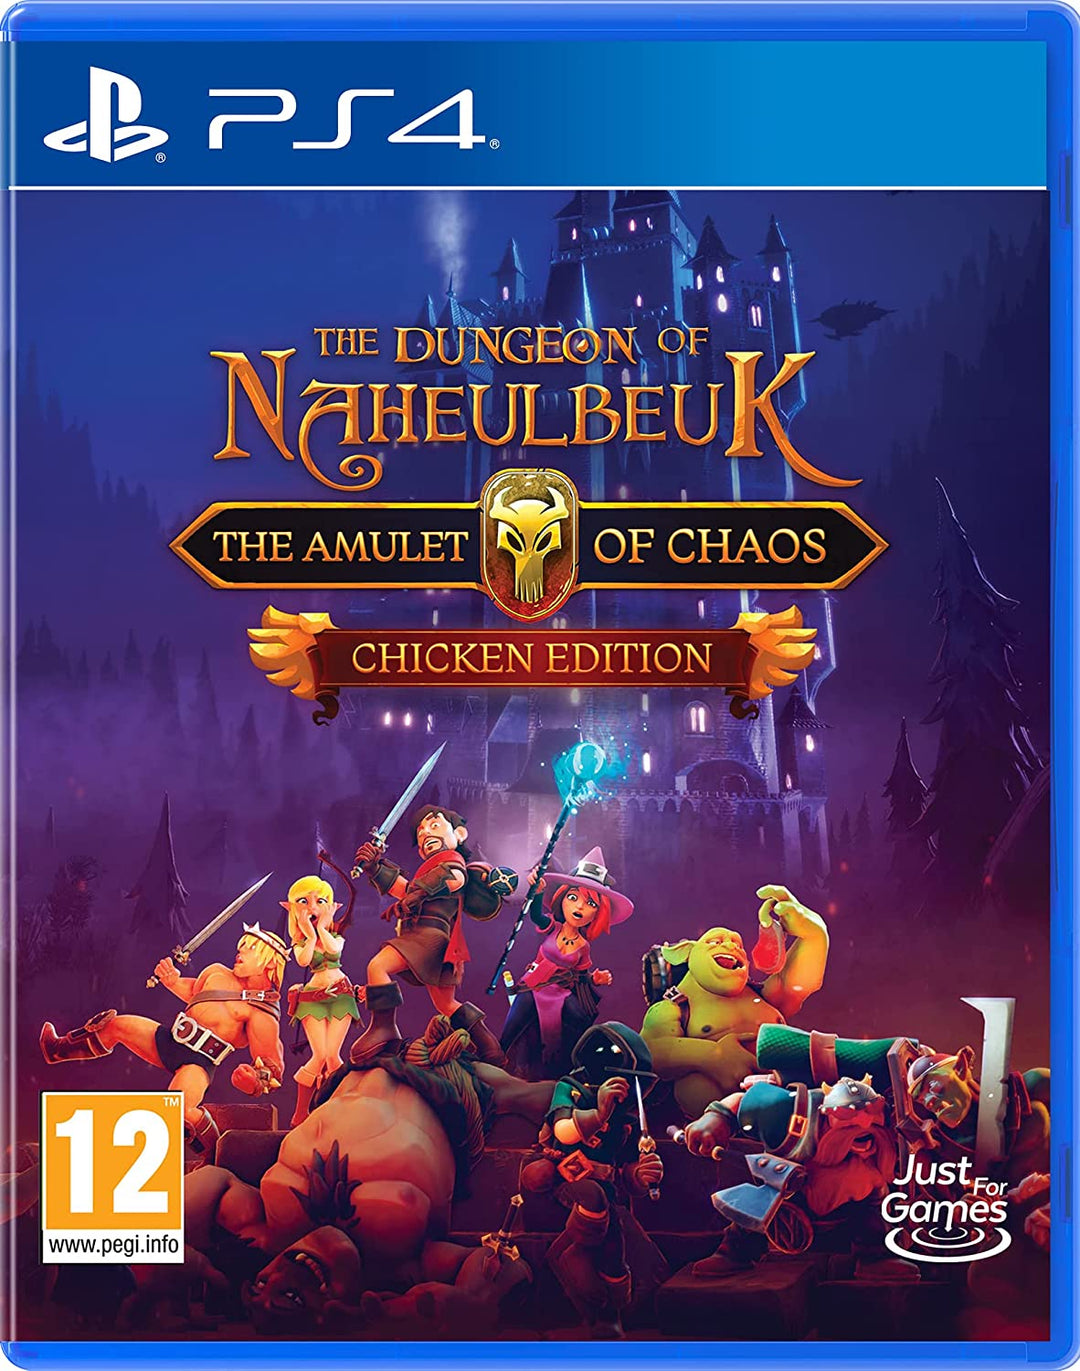 The Dungeon Of Naheulbeuk: The Amulet Of Chaos - Chicken Edition (PS4)